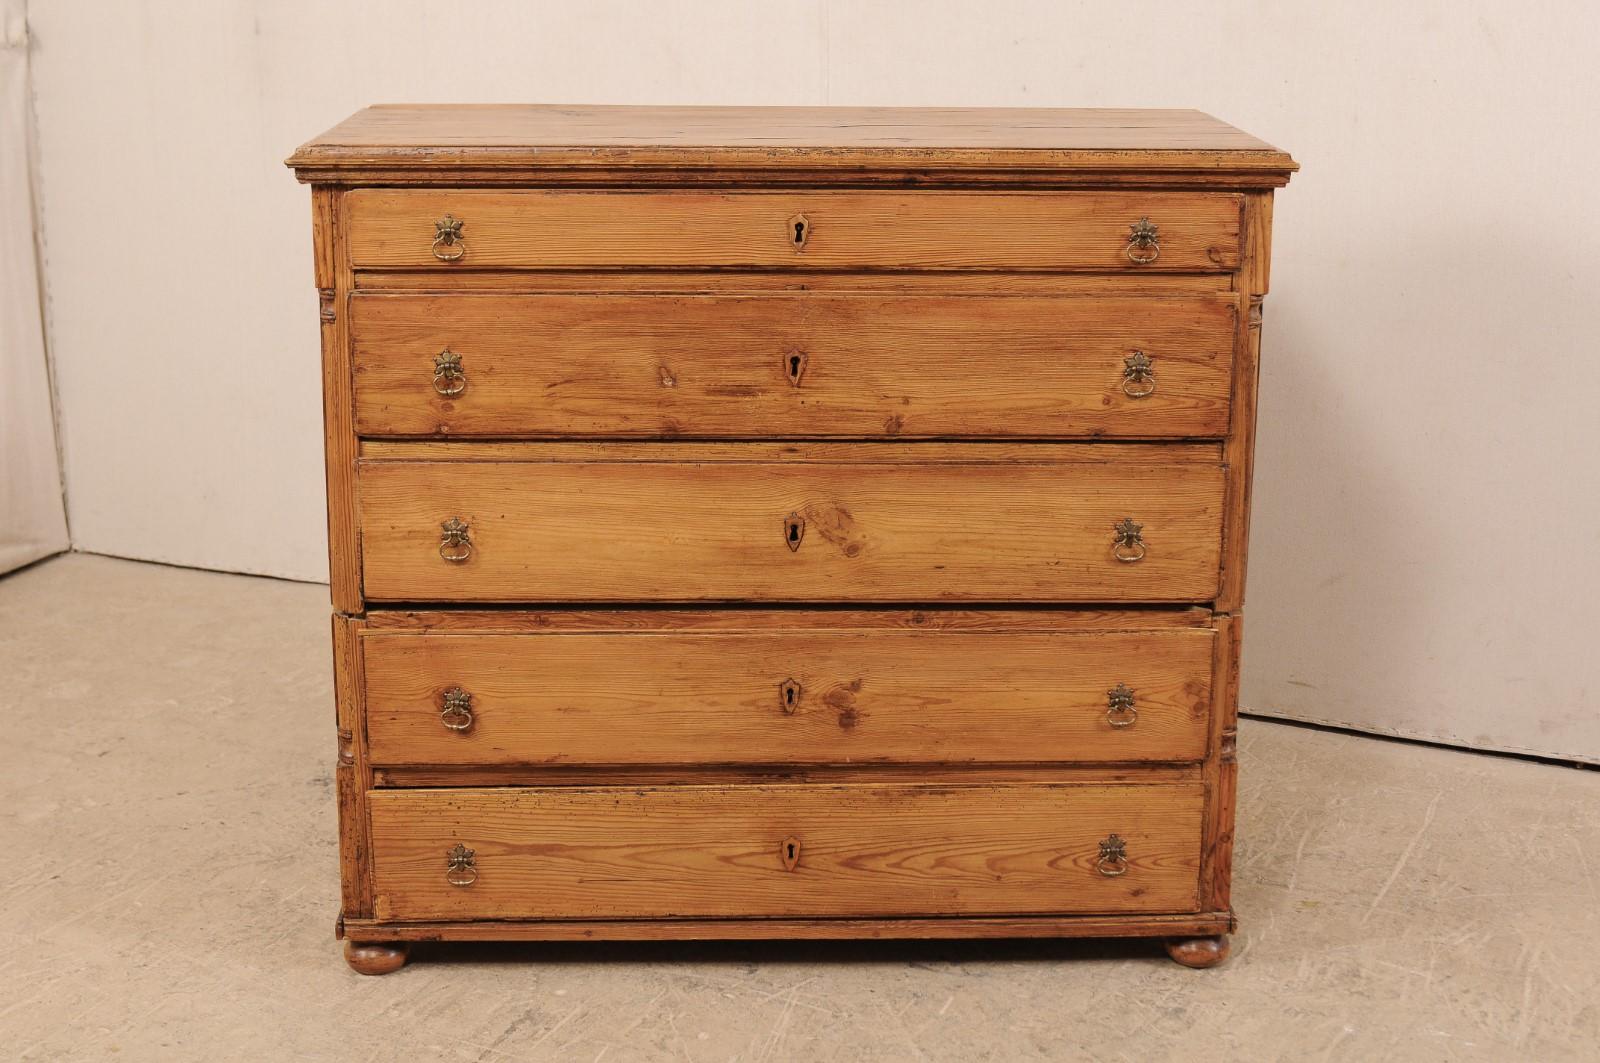 A Swedish chest of five drawers from the mid-19th century. This antique chest-on-chest from Sweden consists of two casement pieces, one stacking atop the other, which combined house a total of five drawers, with the top drawer being more shallow